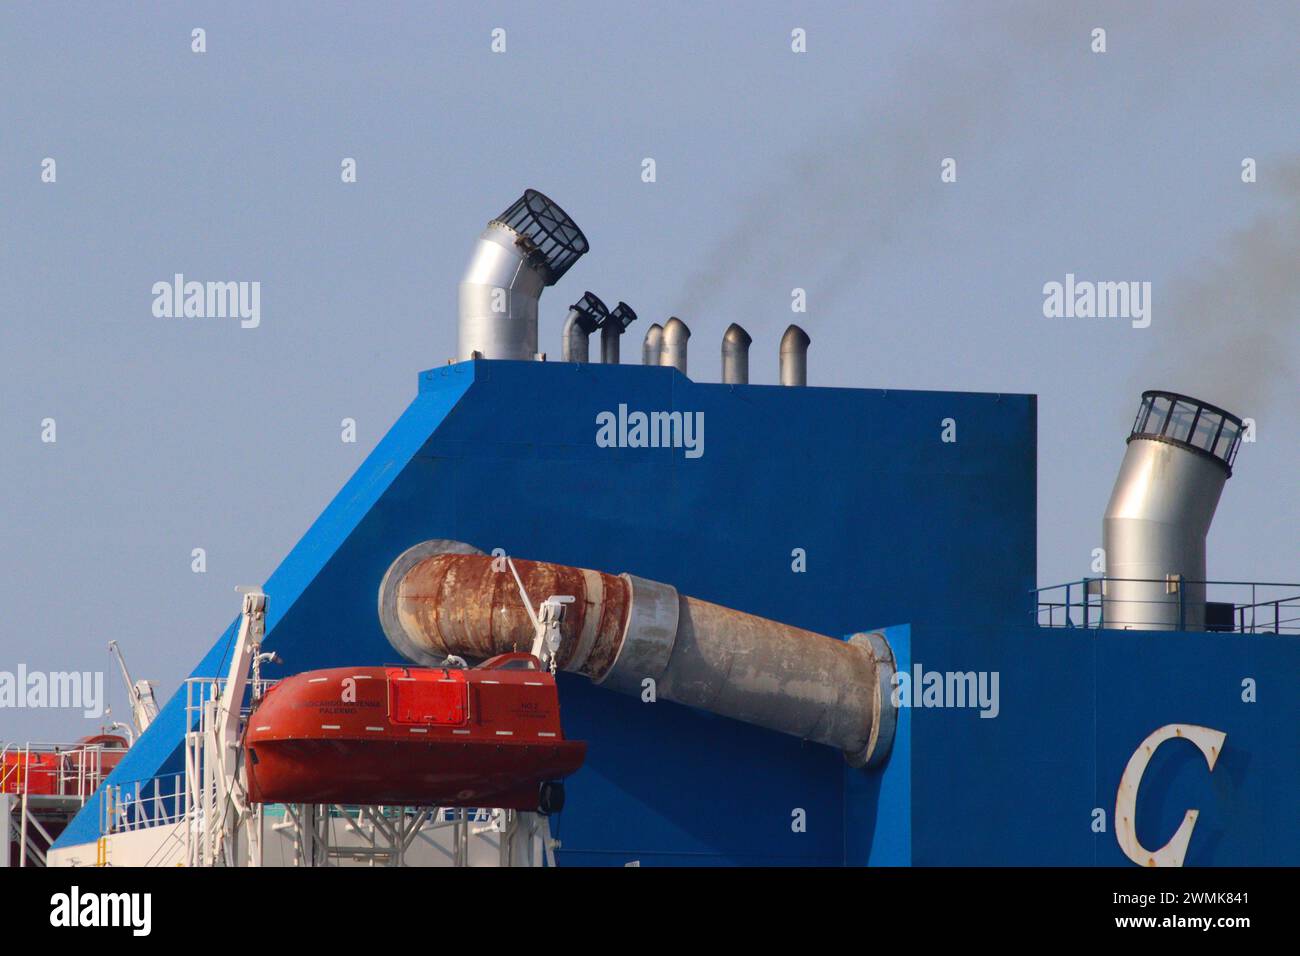 External mesh filters on a ship’s funnel to help prevent airborne particulates from polluting the environment. Stock Photo